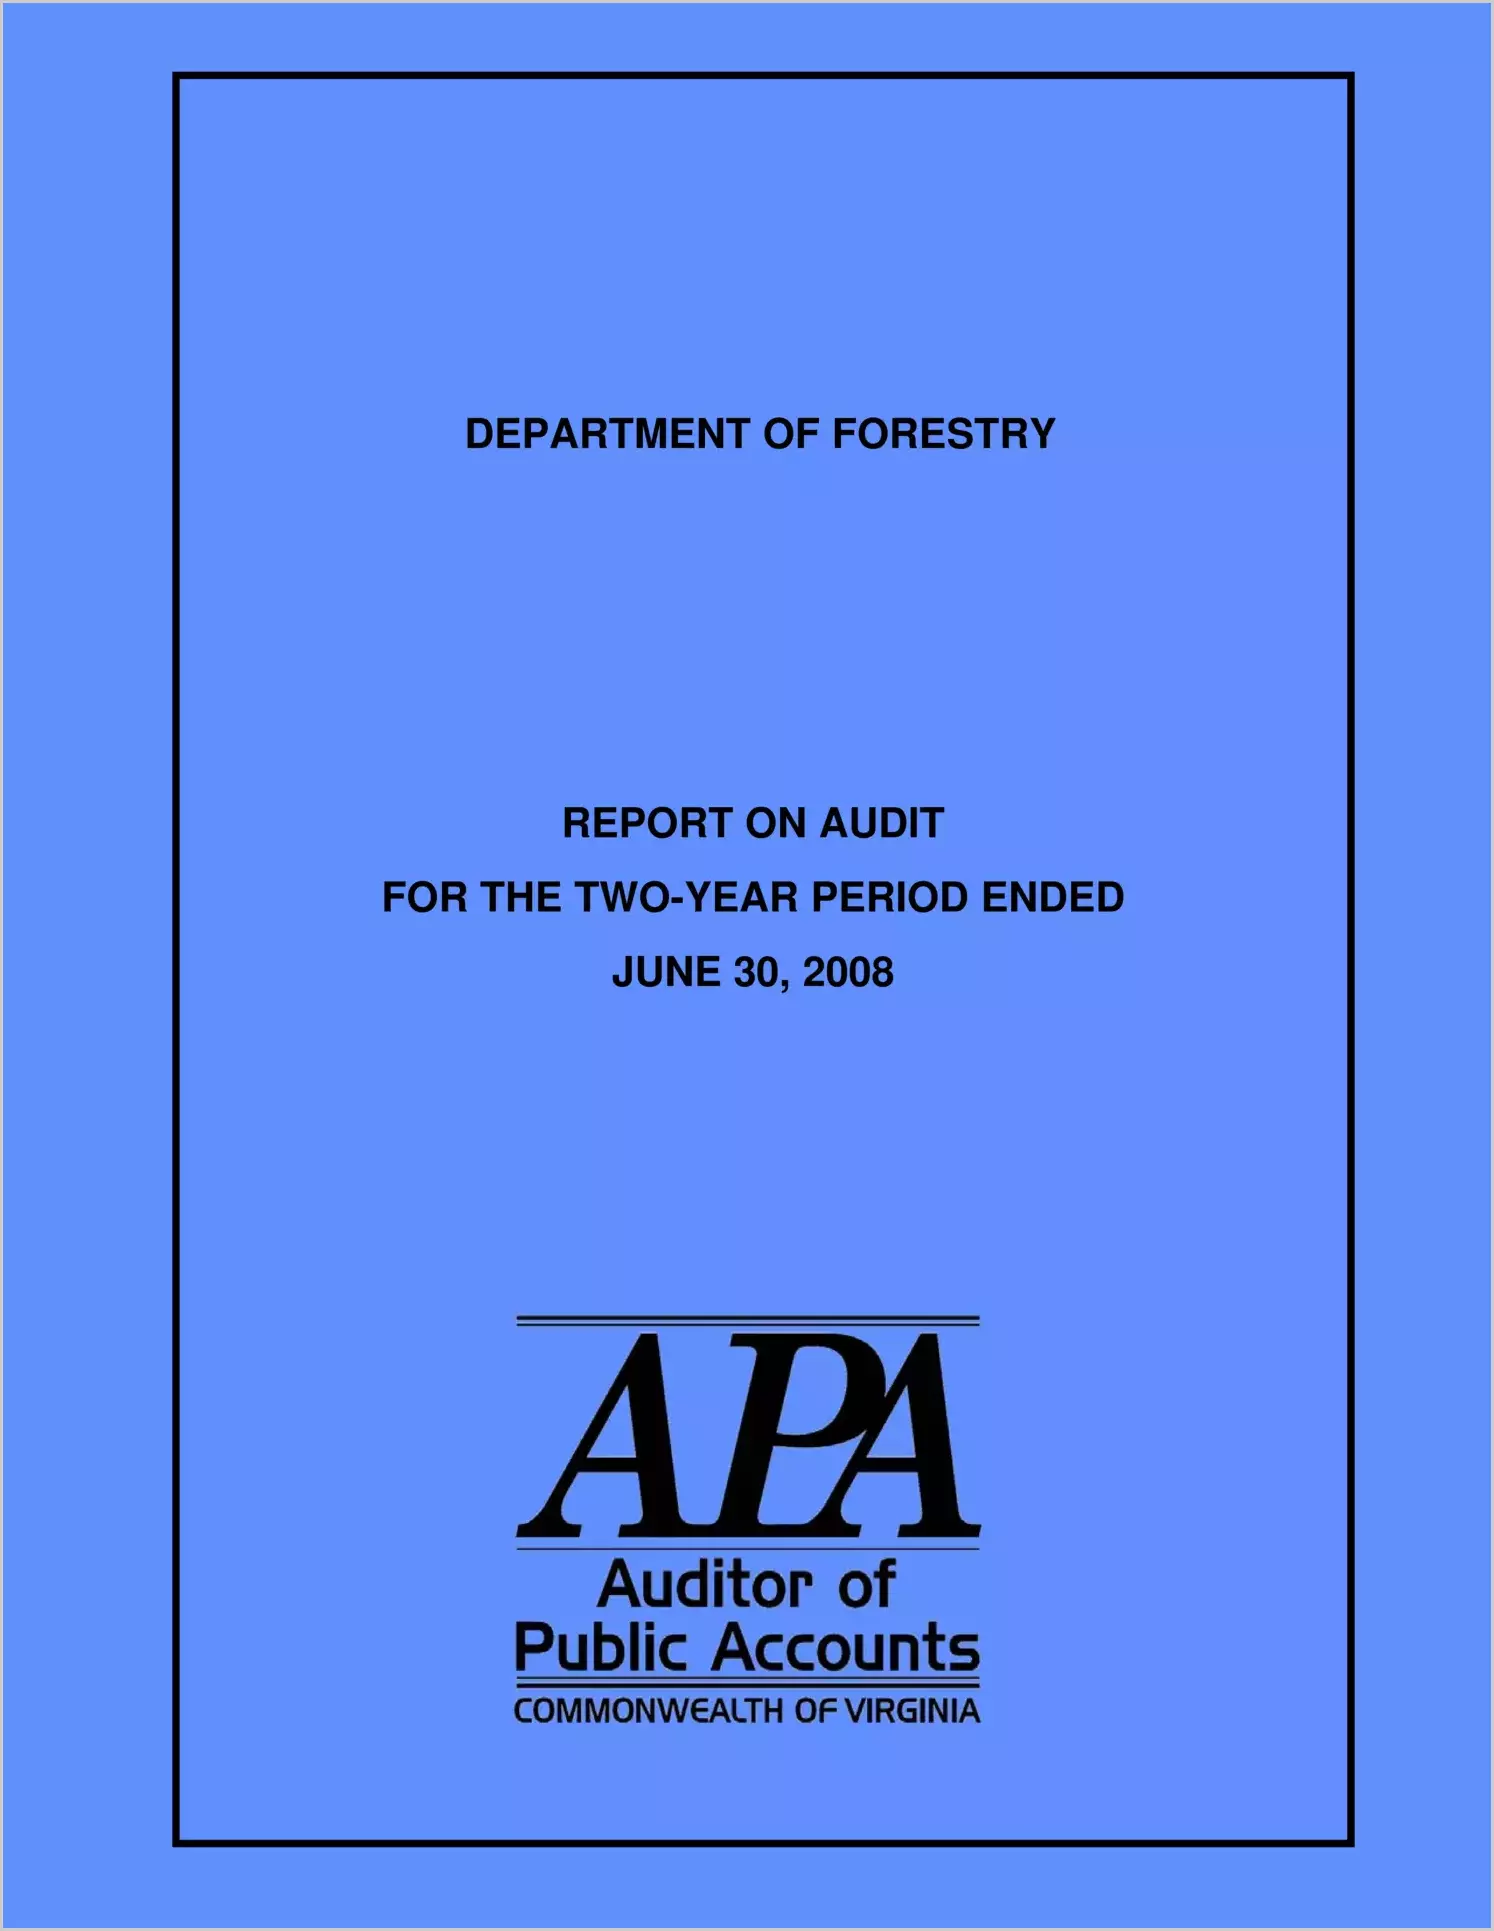 Department of Forestry for the two-year period ending June 30, 2008